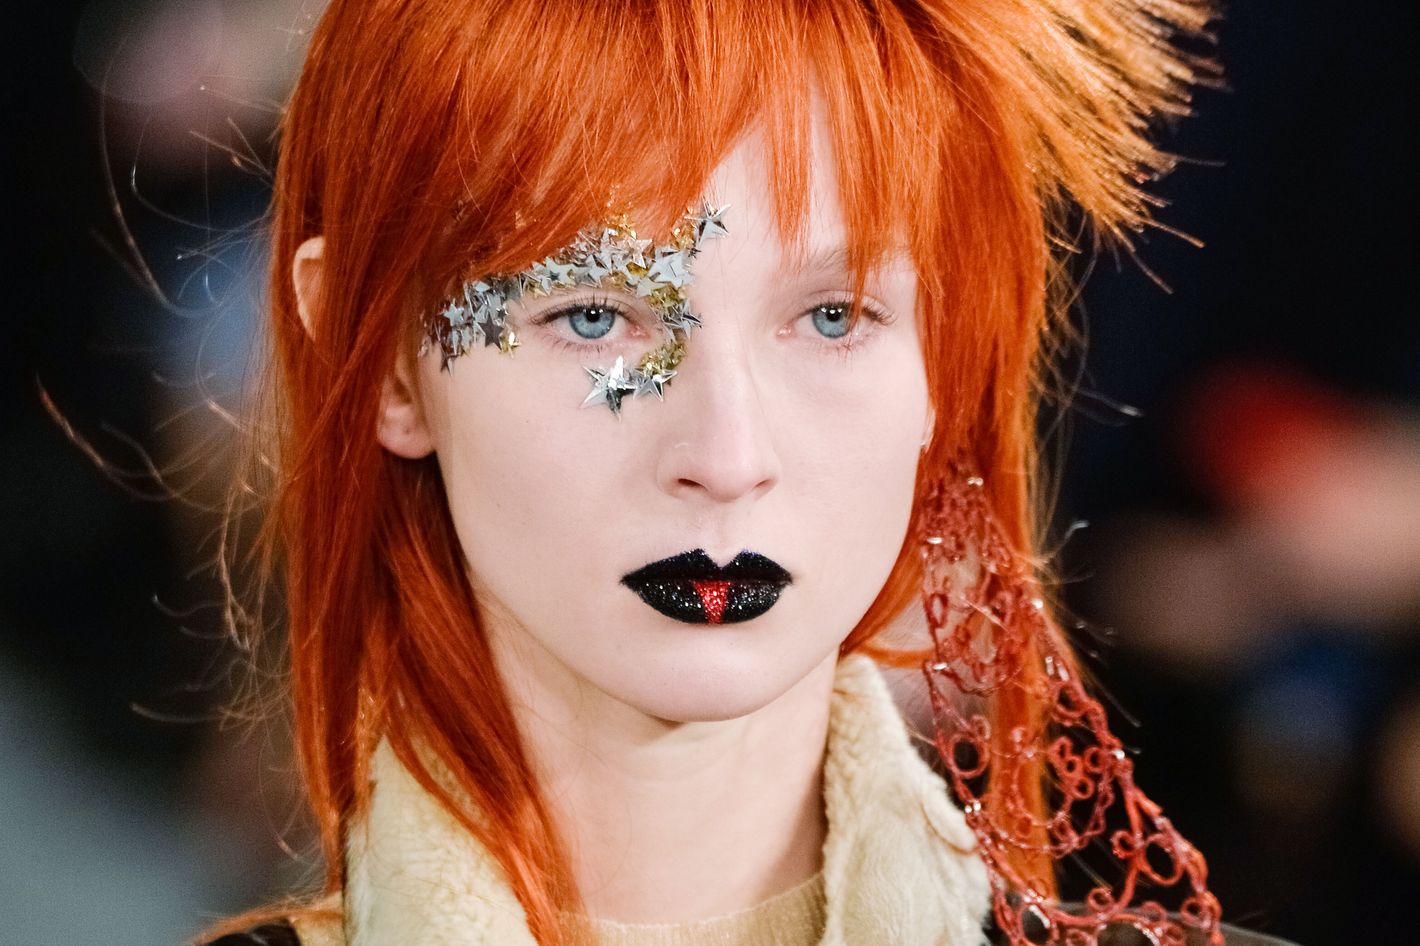 Margiela Paid Homage to David Bowie